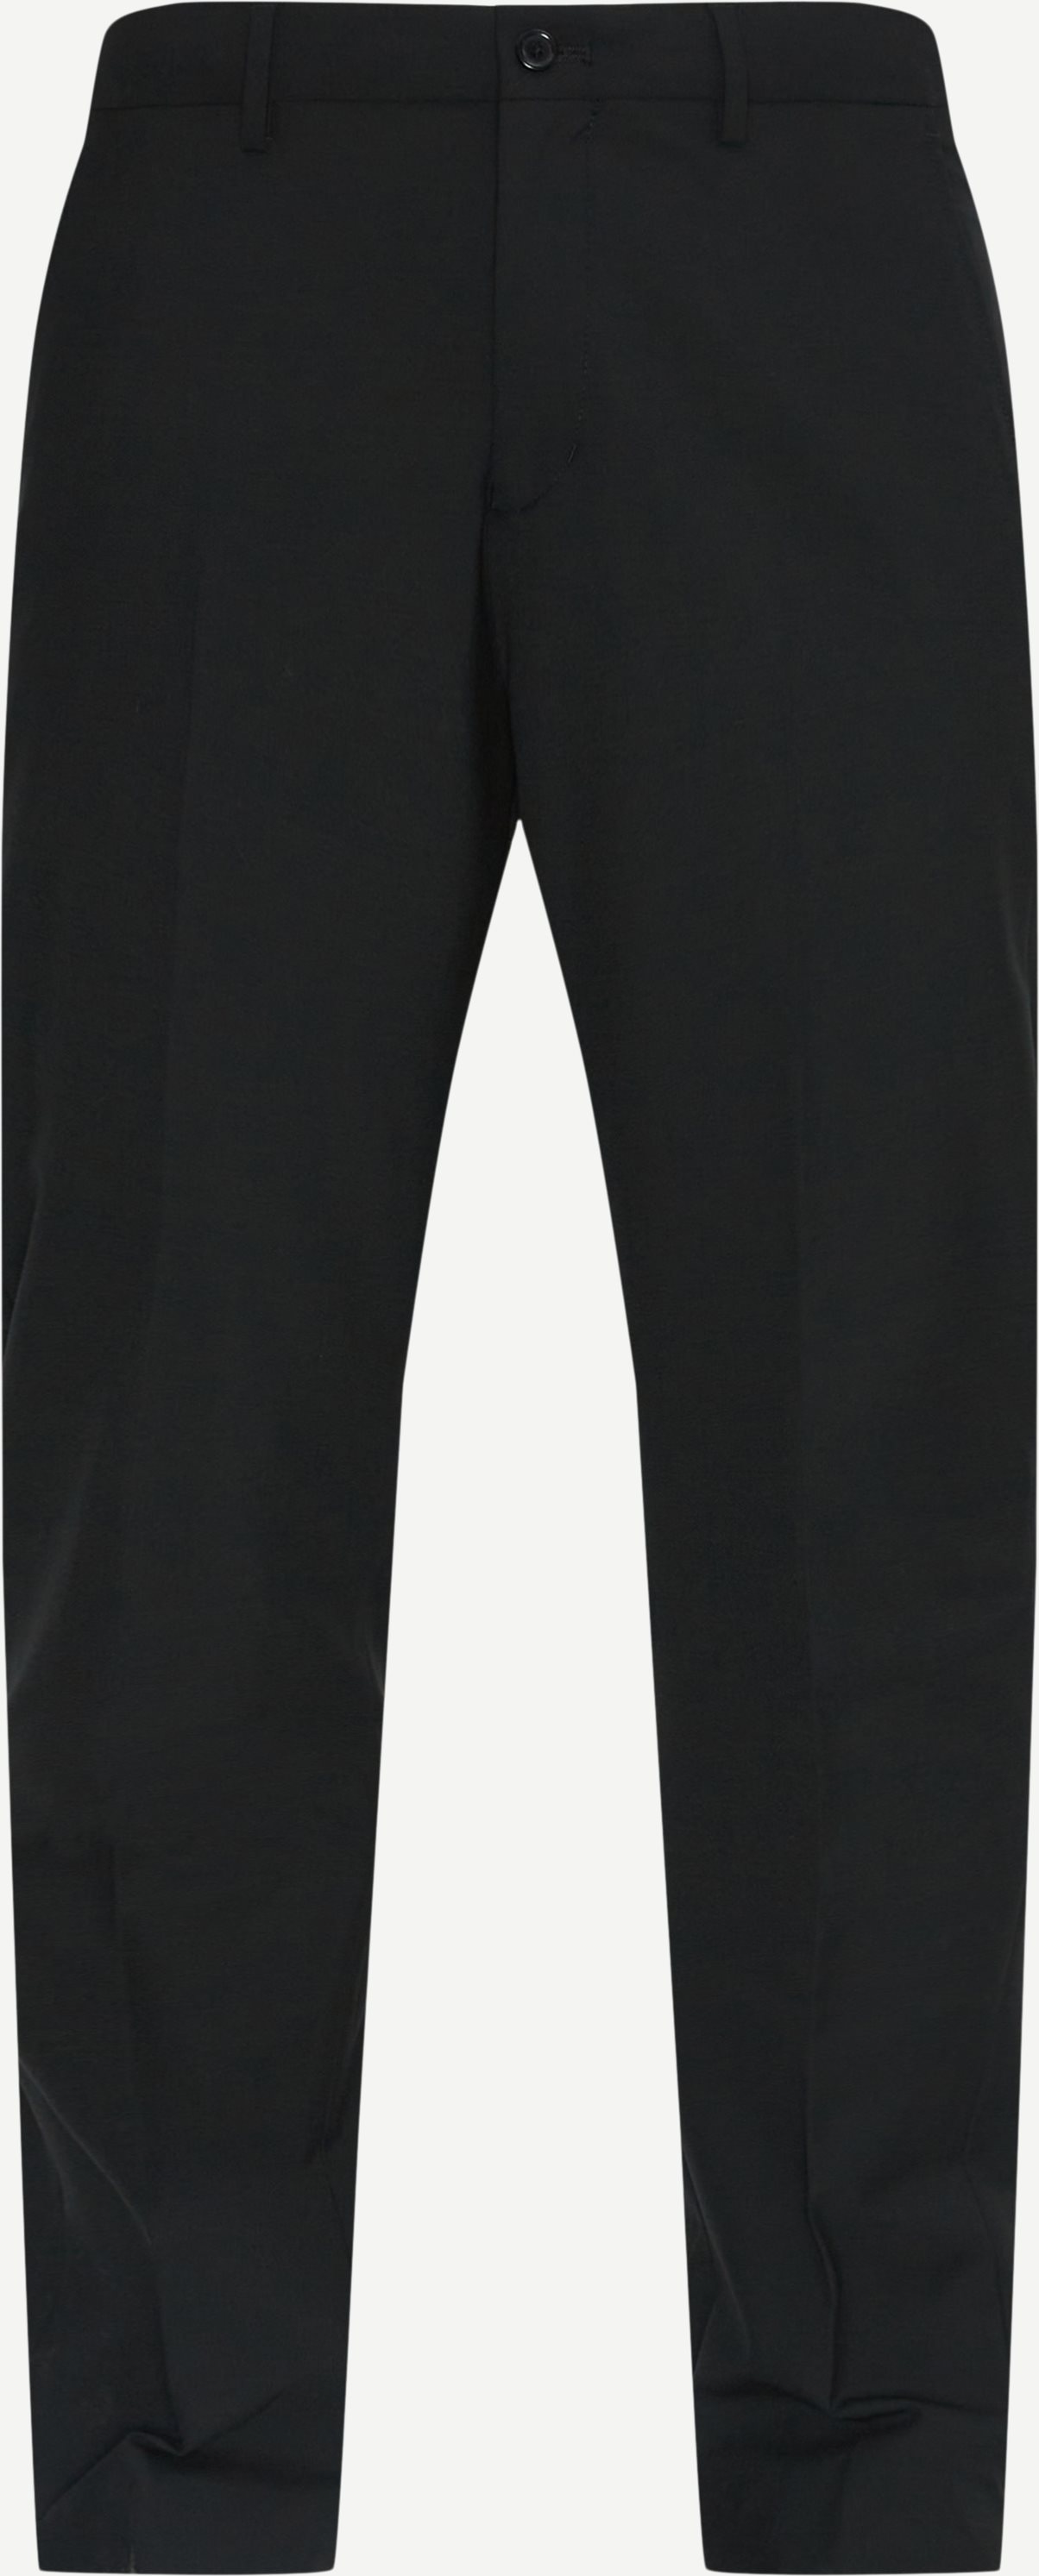 Sunwill Trousers WILL 80304-1900 Black